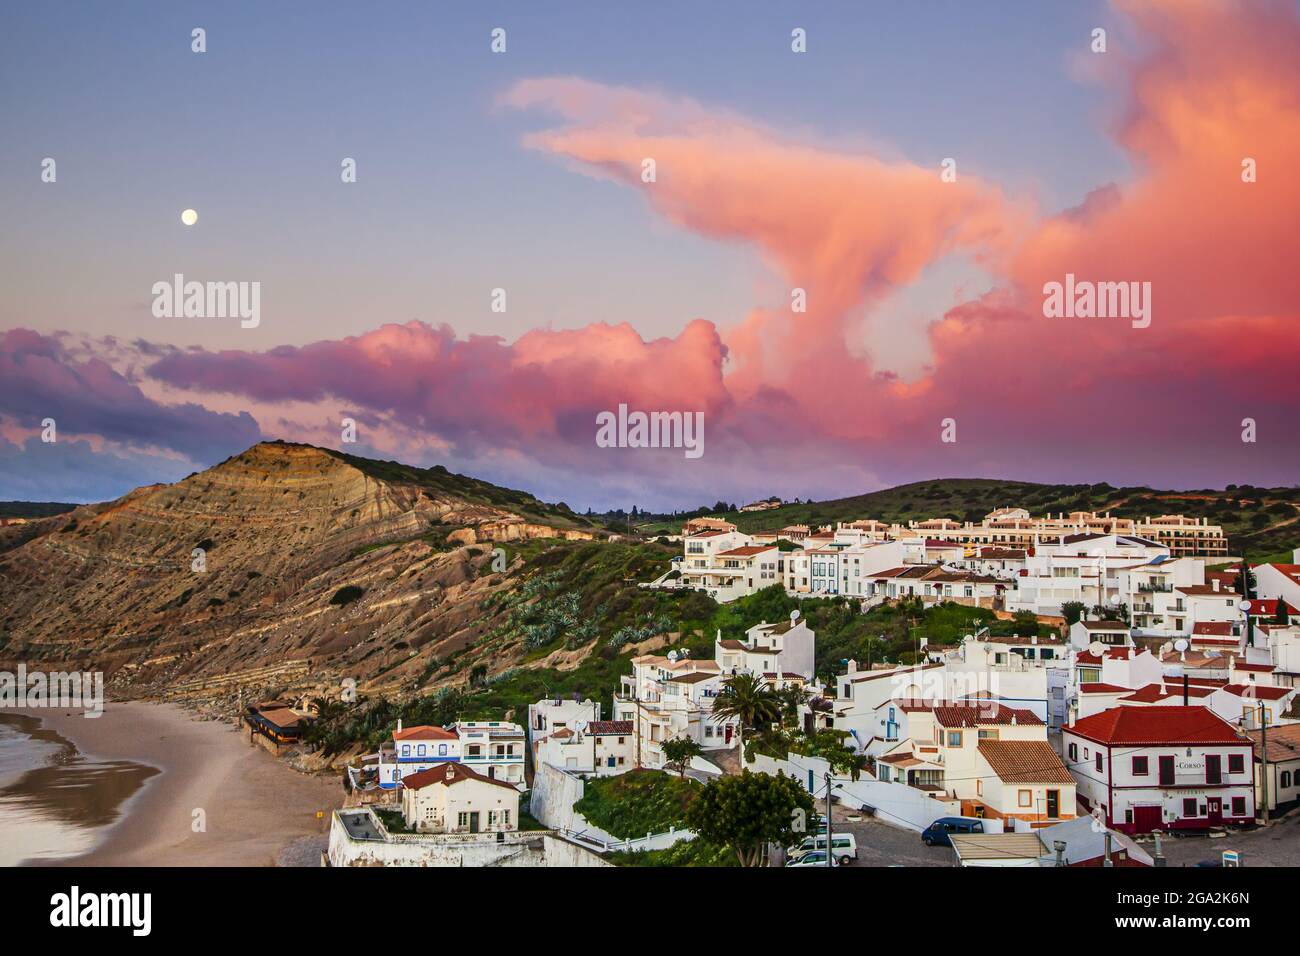 Dramatic pink cloud formation and full moon in a blue sky above the traditional fishing village of Burgau in the municipality of Vila do Bispo in t... Stock Photo